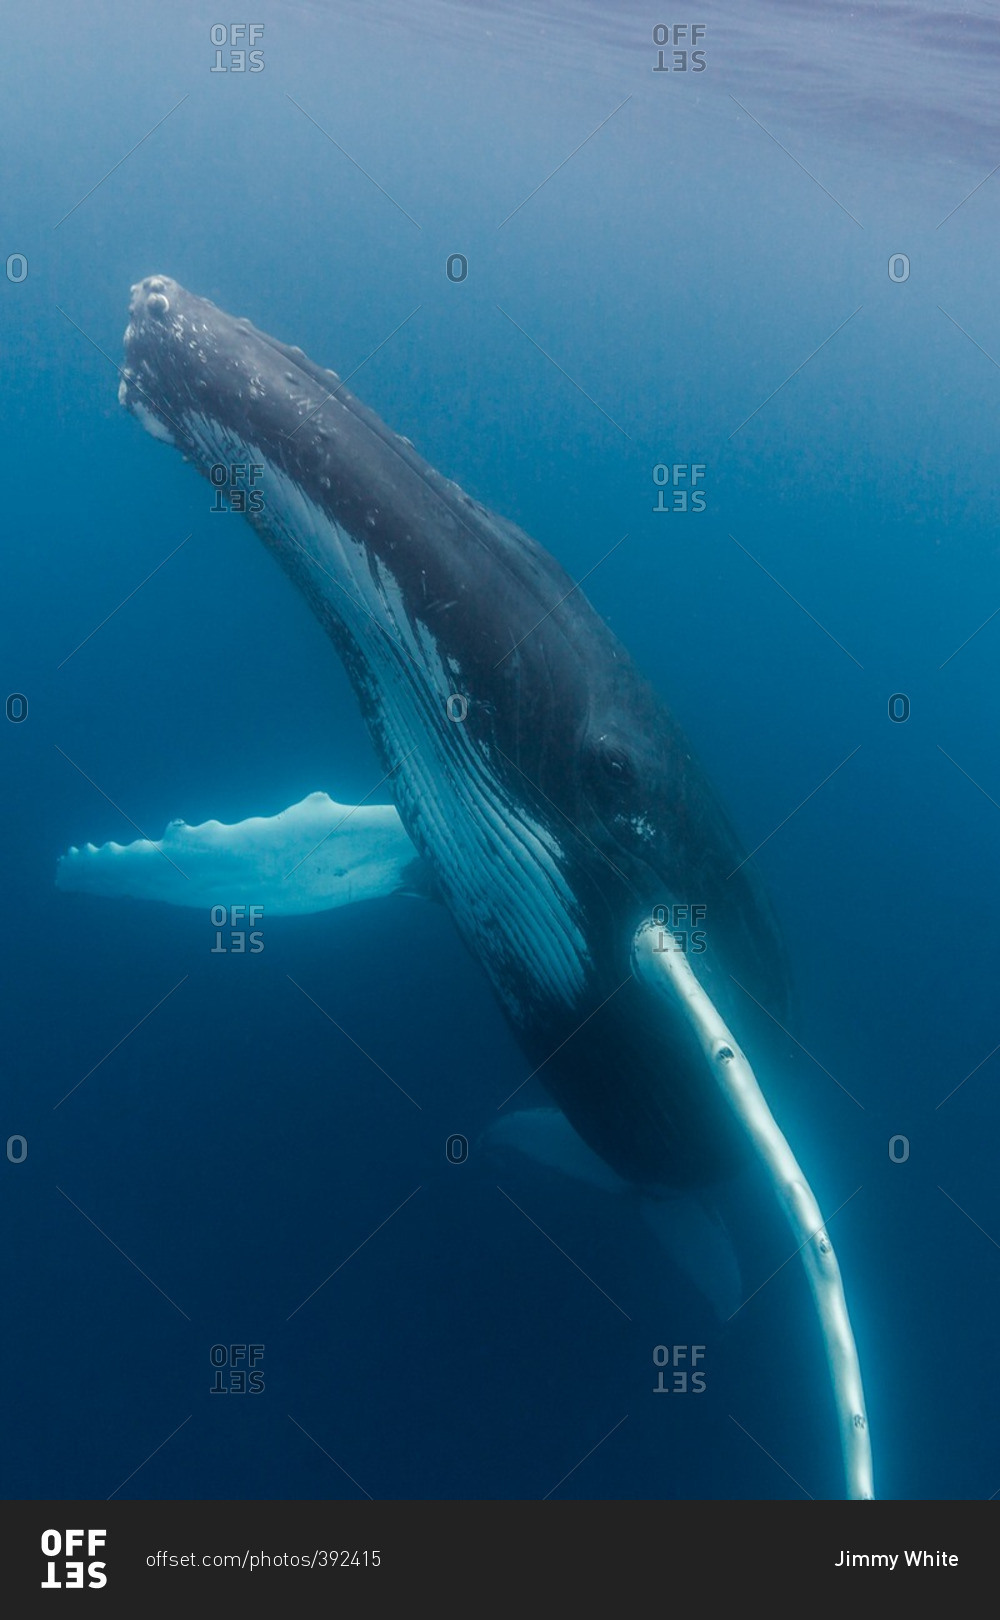 Underwater portrait of a Humpback Whale